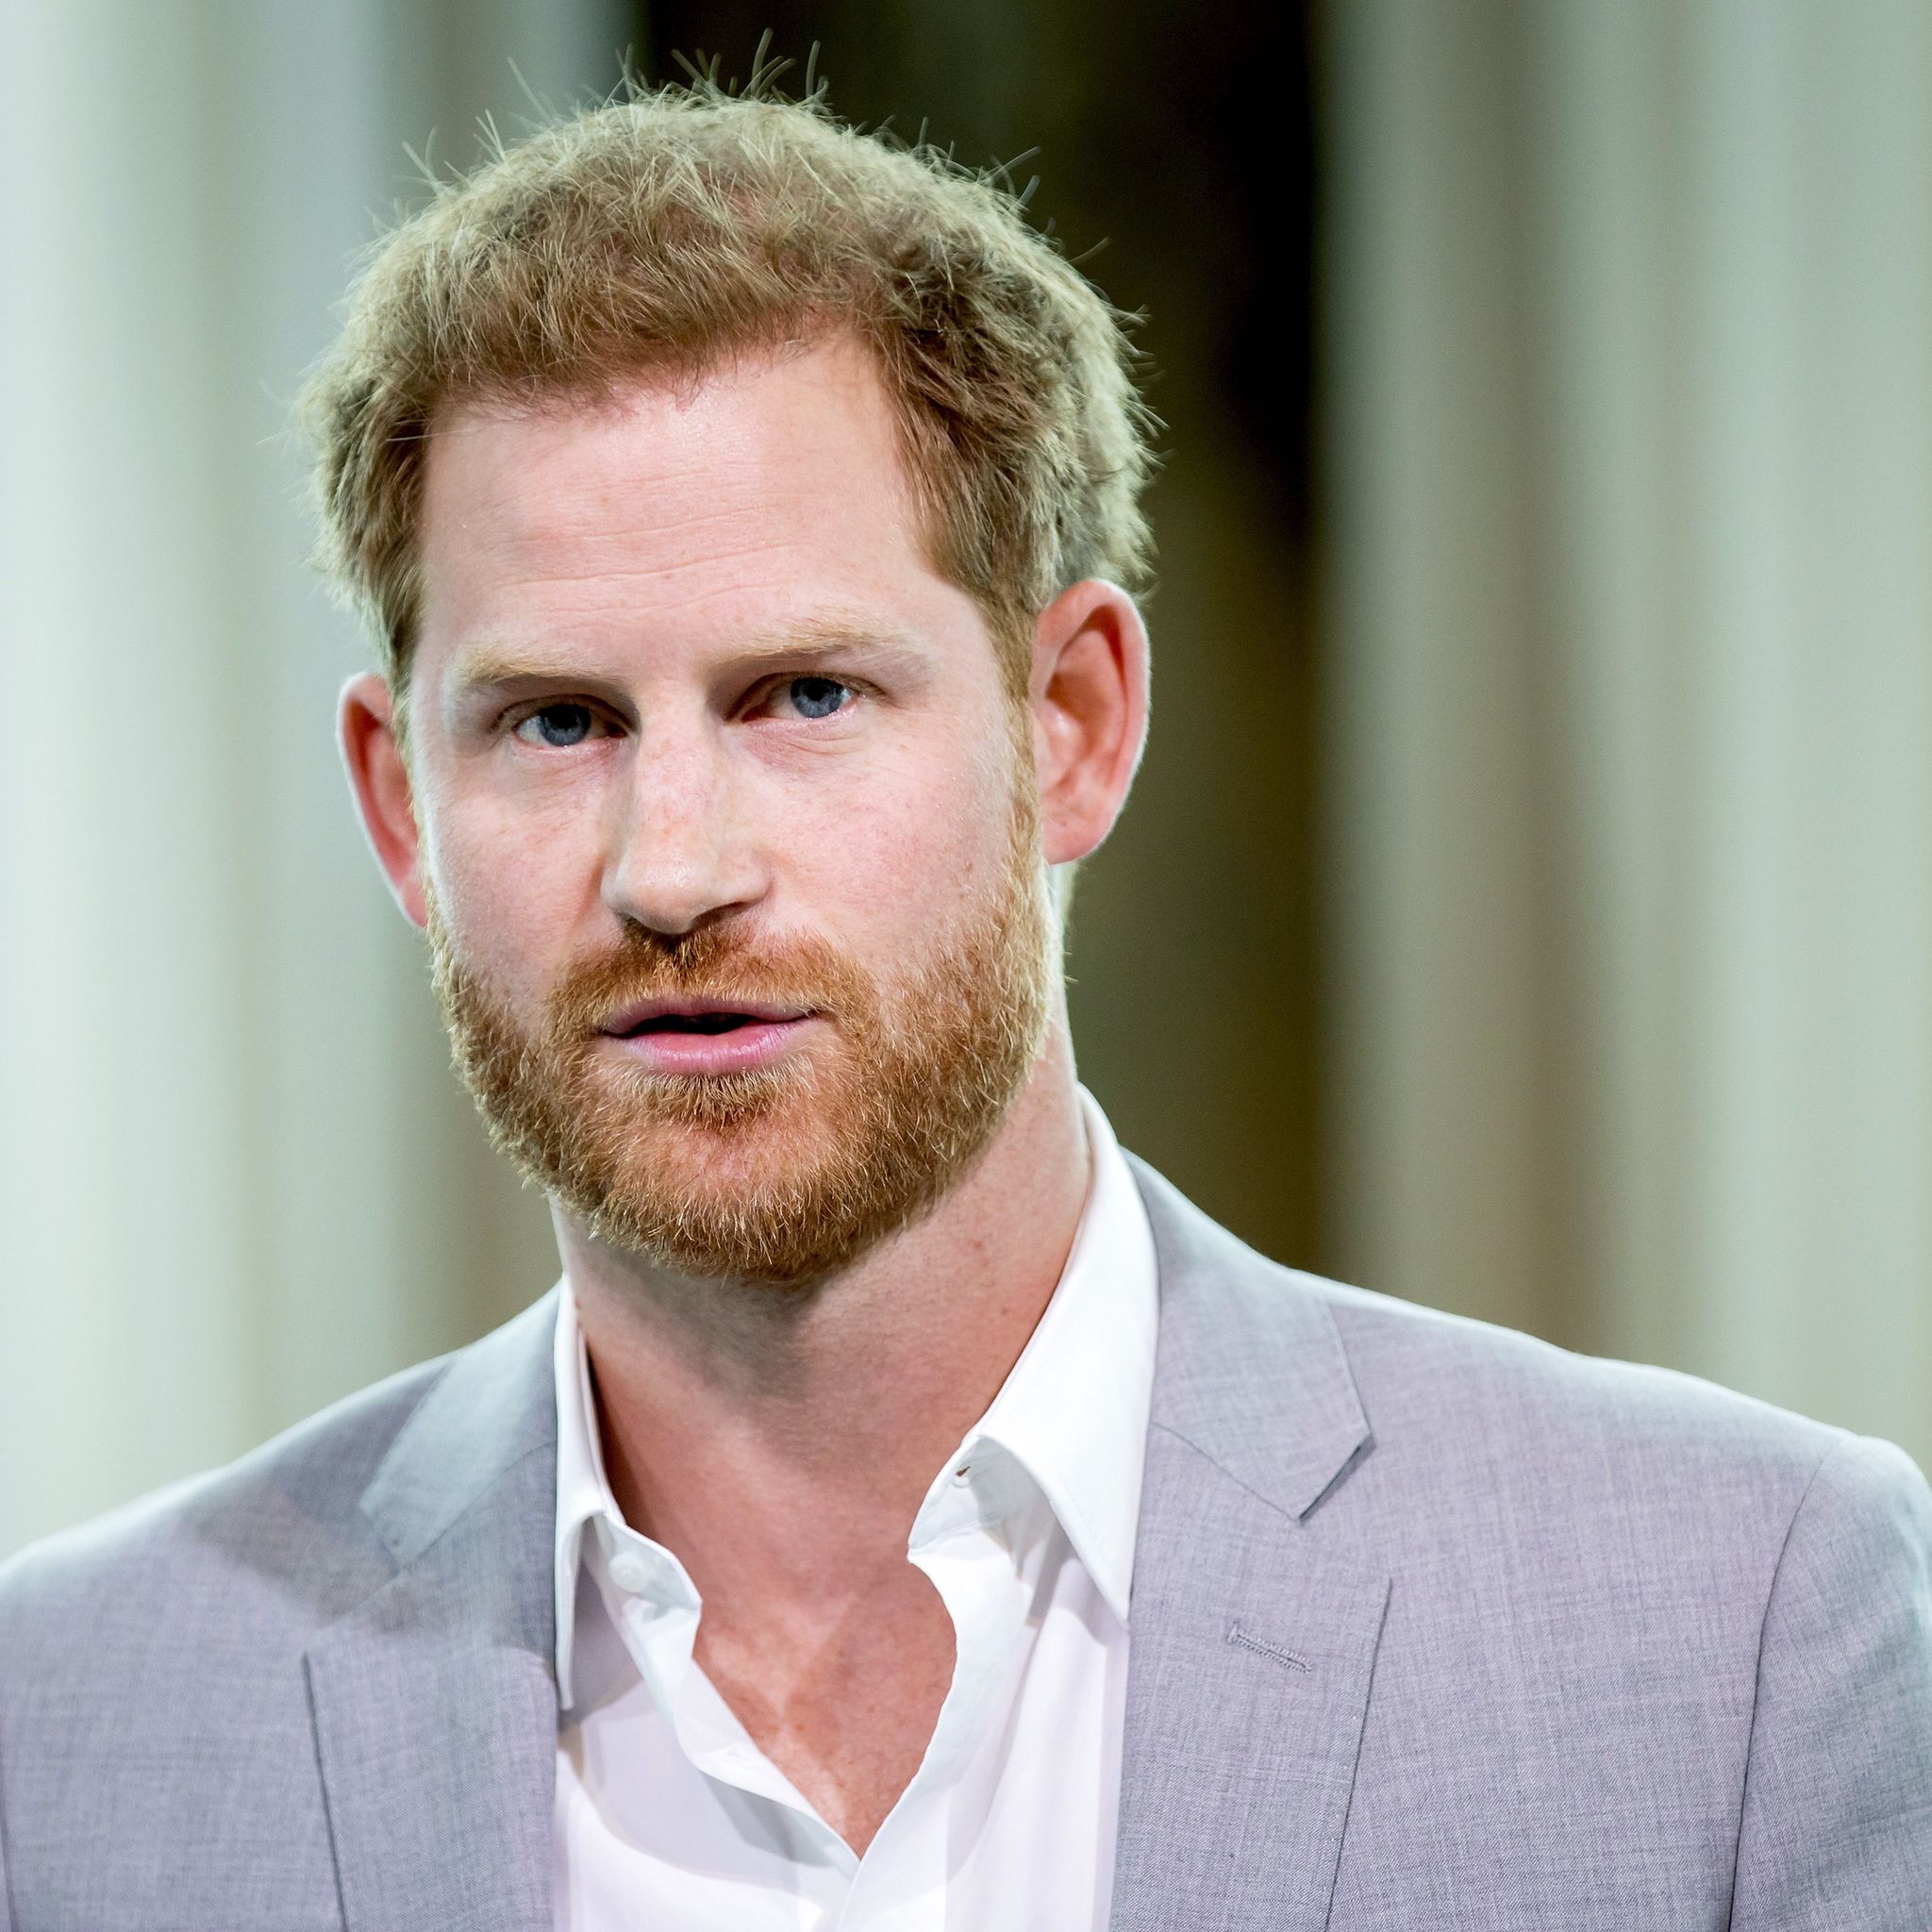 Prince Harry considered quitting royal role before